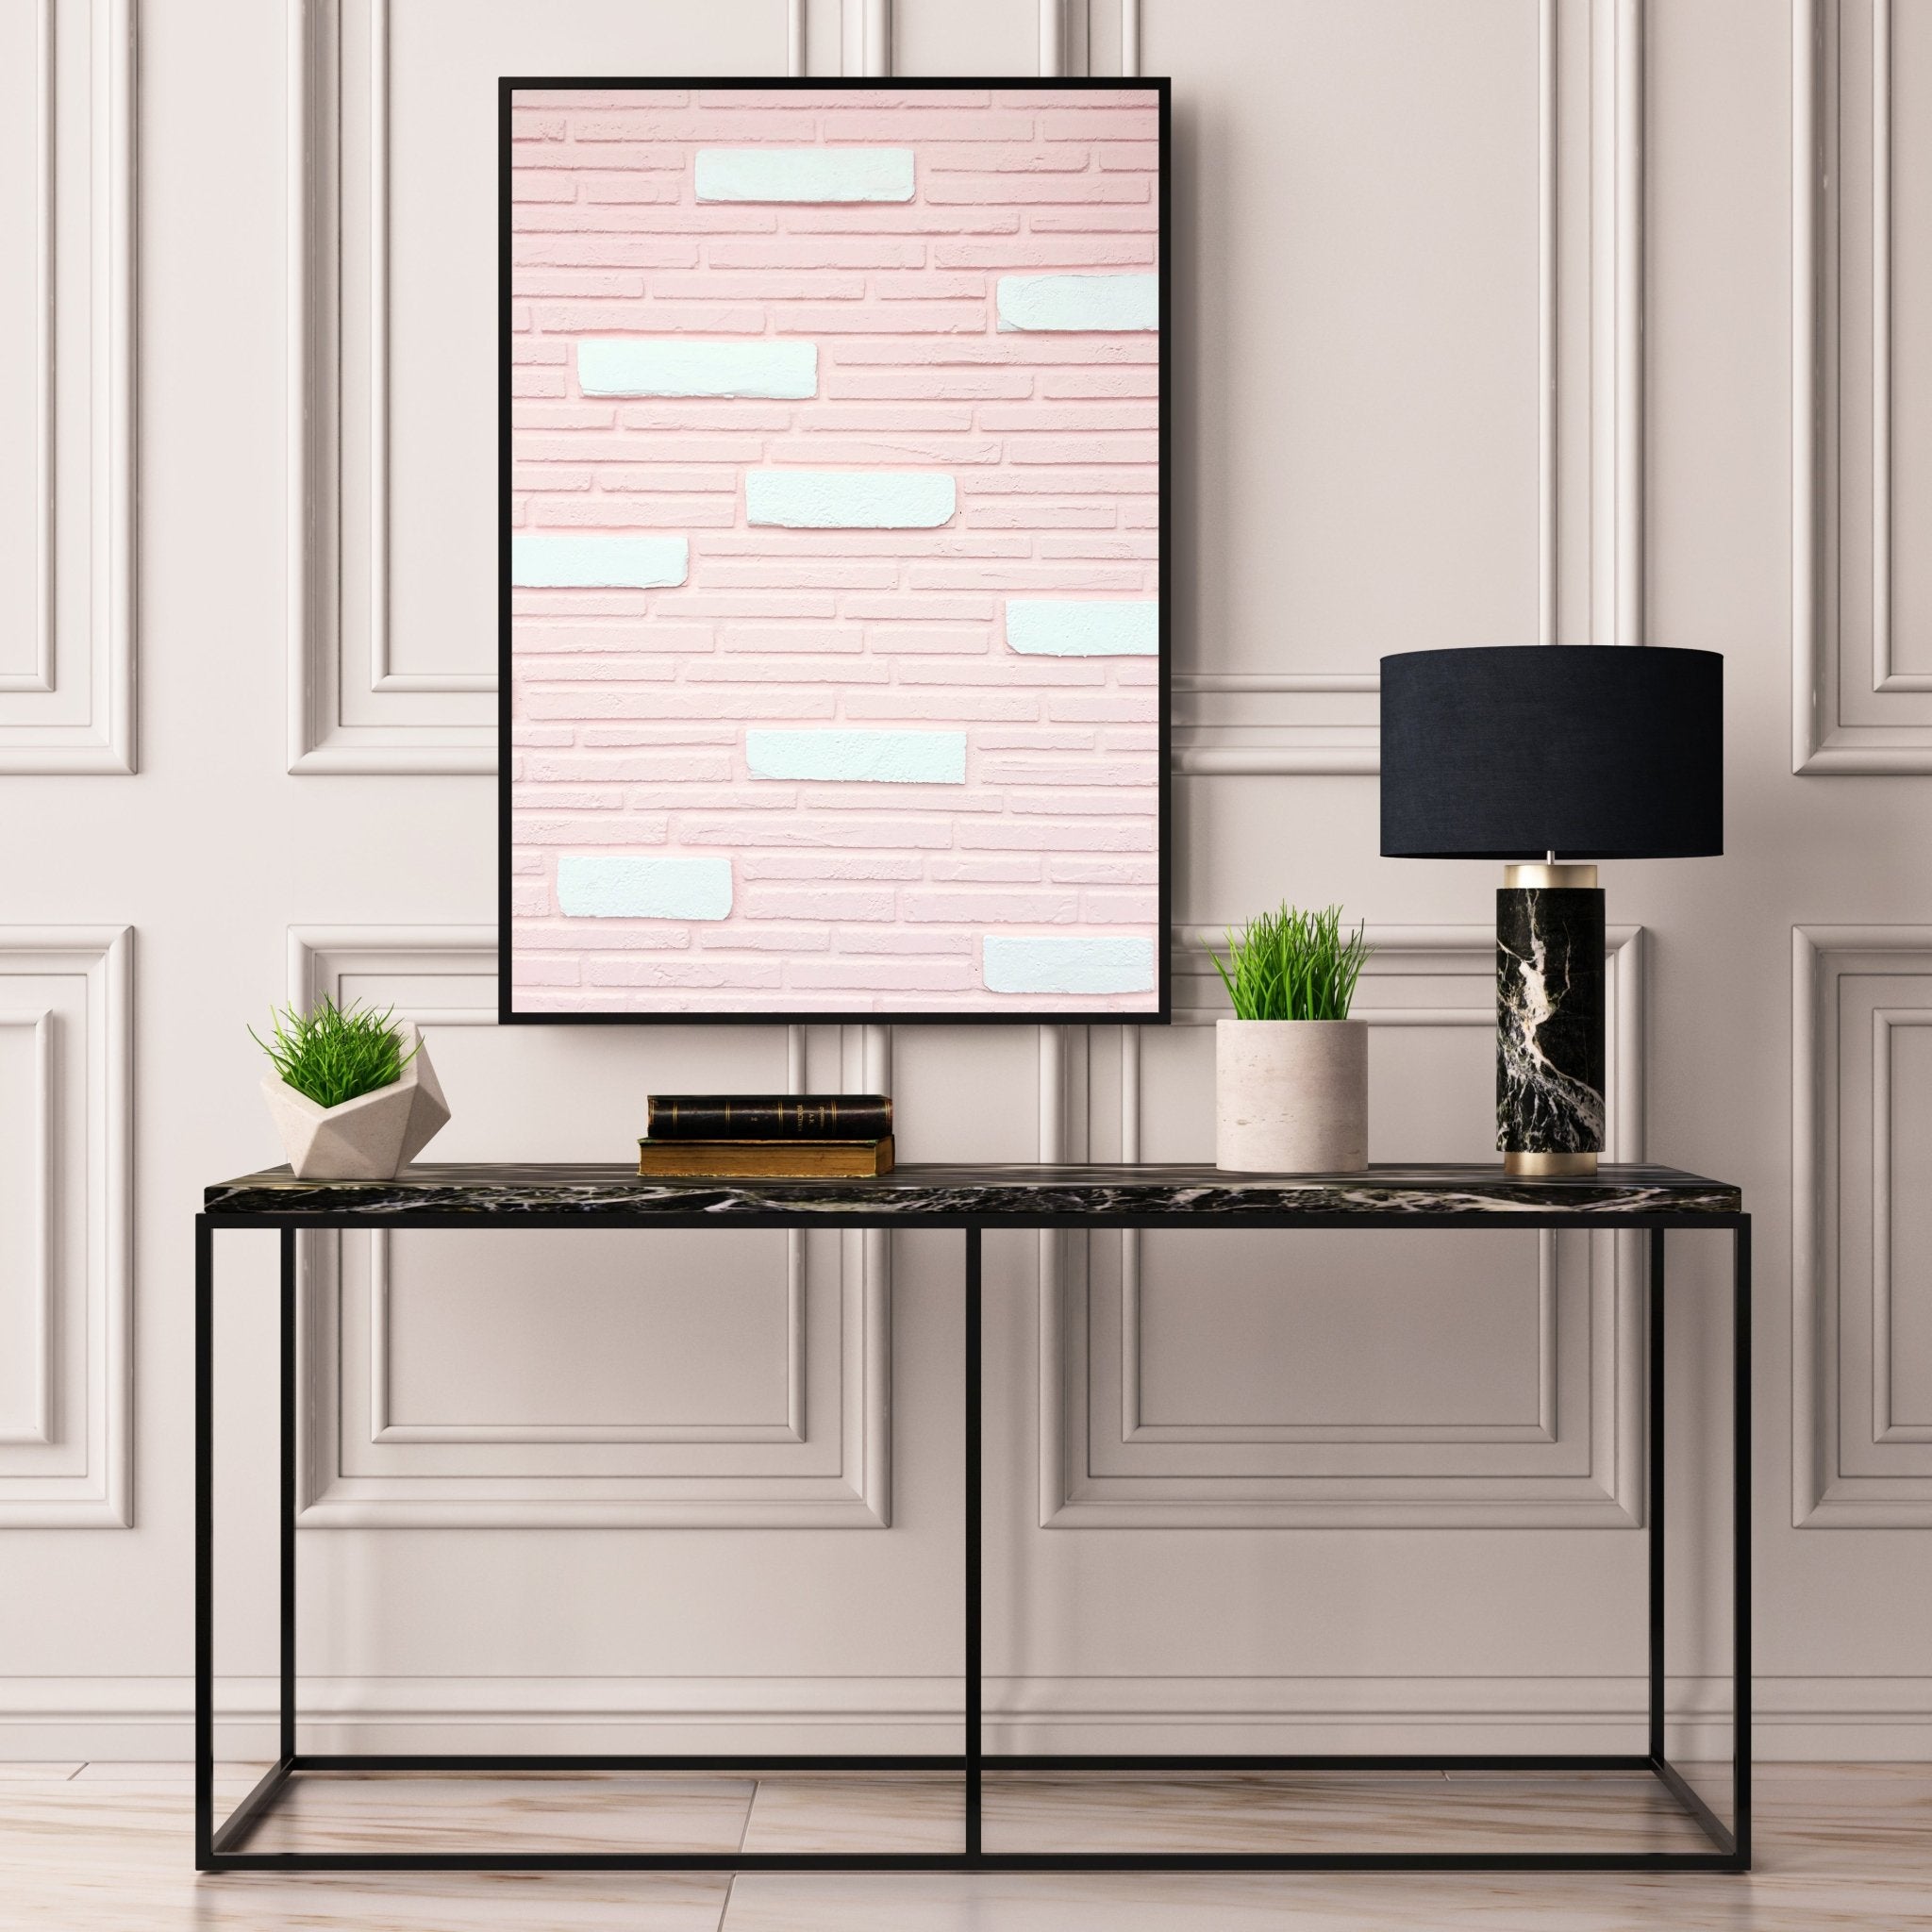 Pink & White Brick Wall - D'Luxe Prints